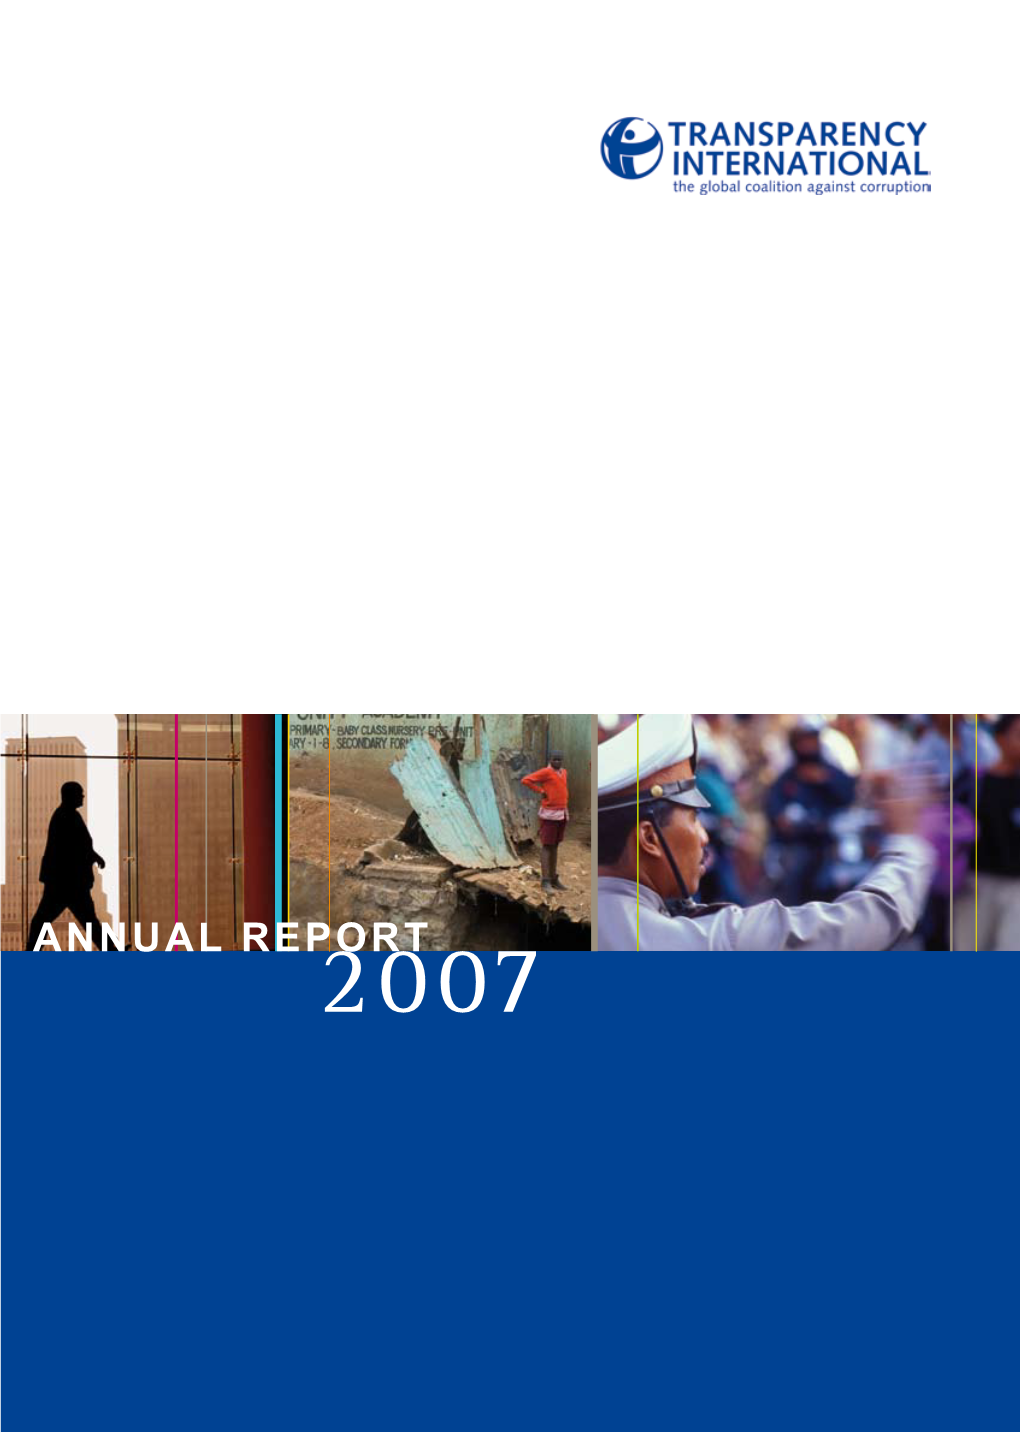 ANNUAL REPORT 2007 Your Gateway to the Fight Against Corruption